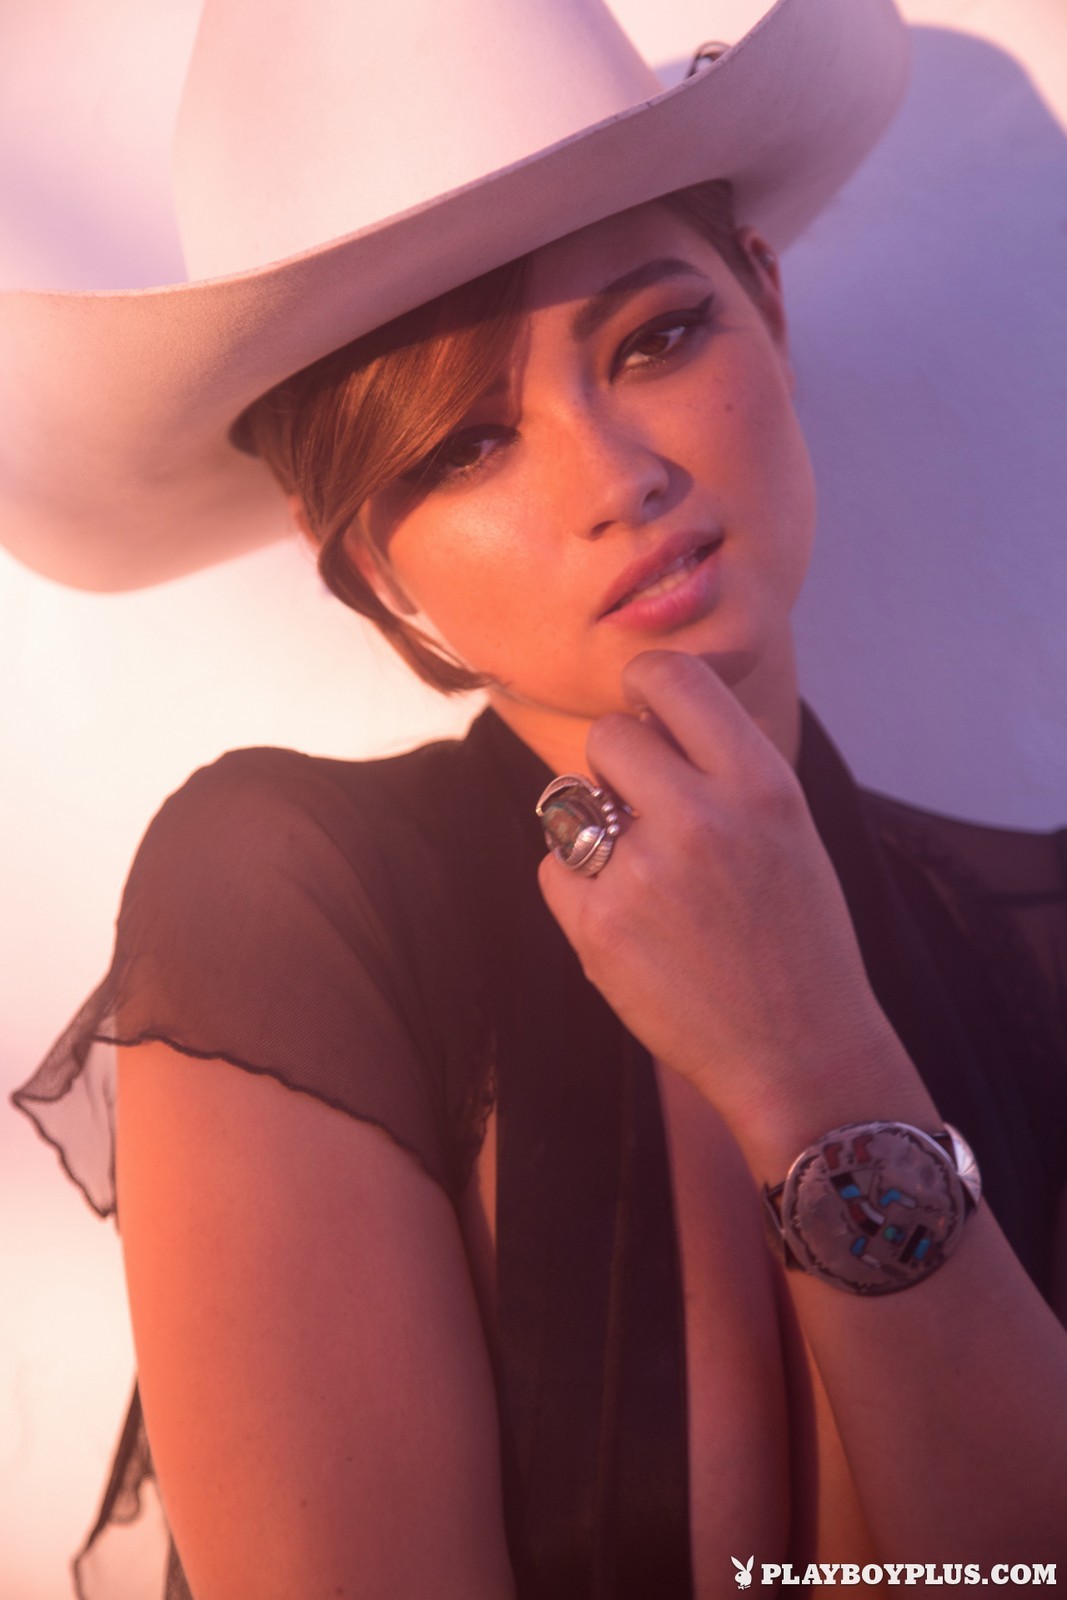 People 1067x1600 Chelsie Aryn Playboy women cowboy hats Playboy Plus watermarked hat women with hats rings face makeup looking at viewer Playmate brunette Playmate of the Month March 2015 (Year) portrait display